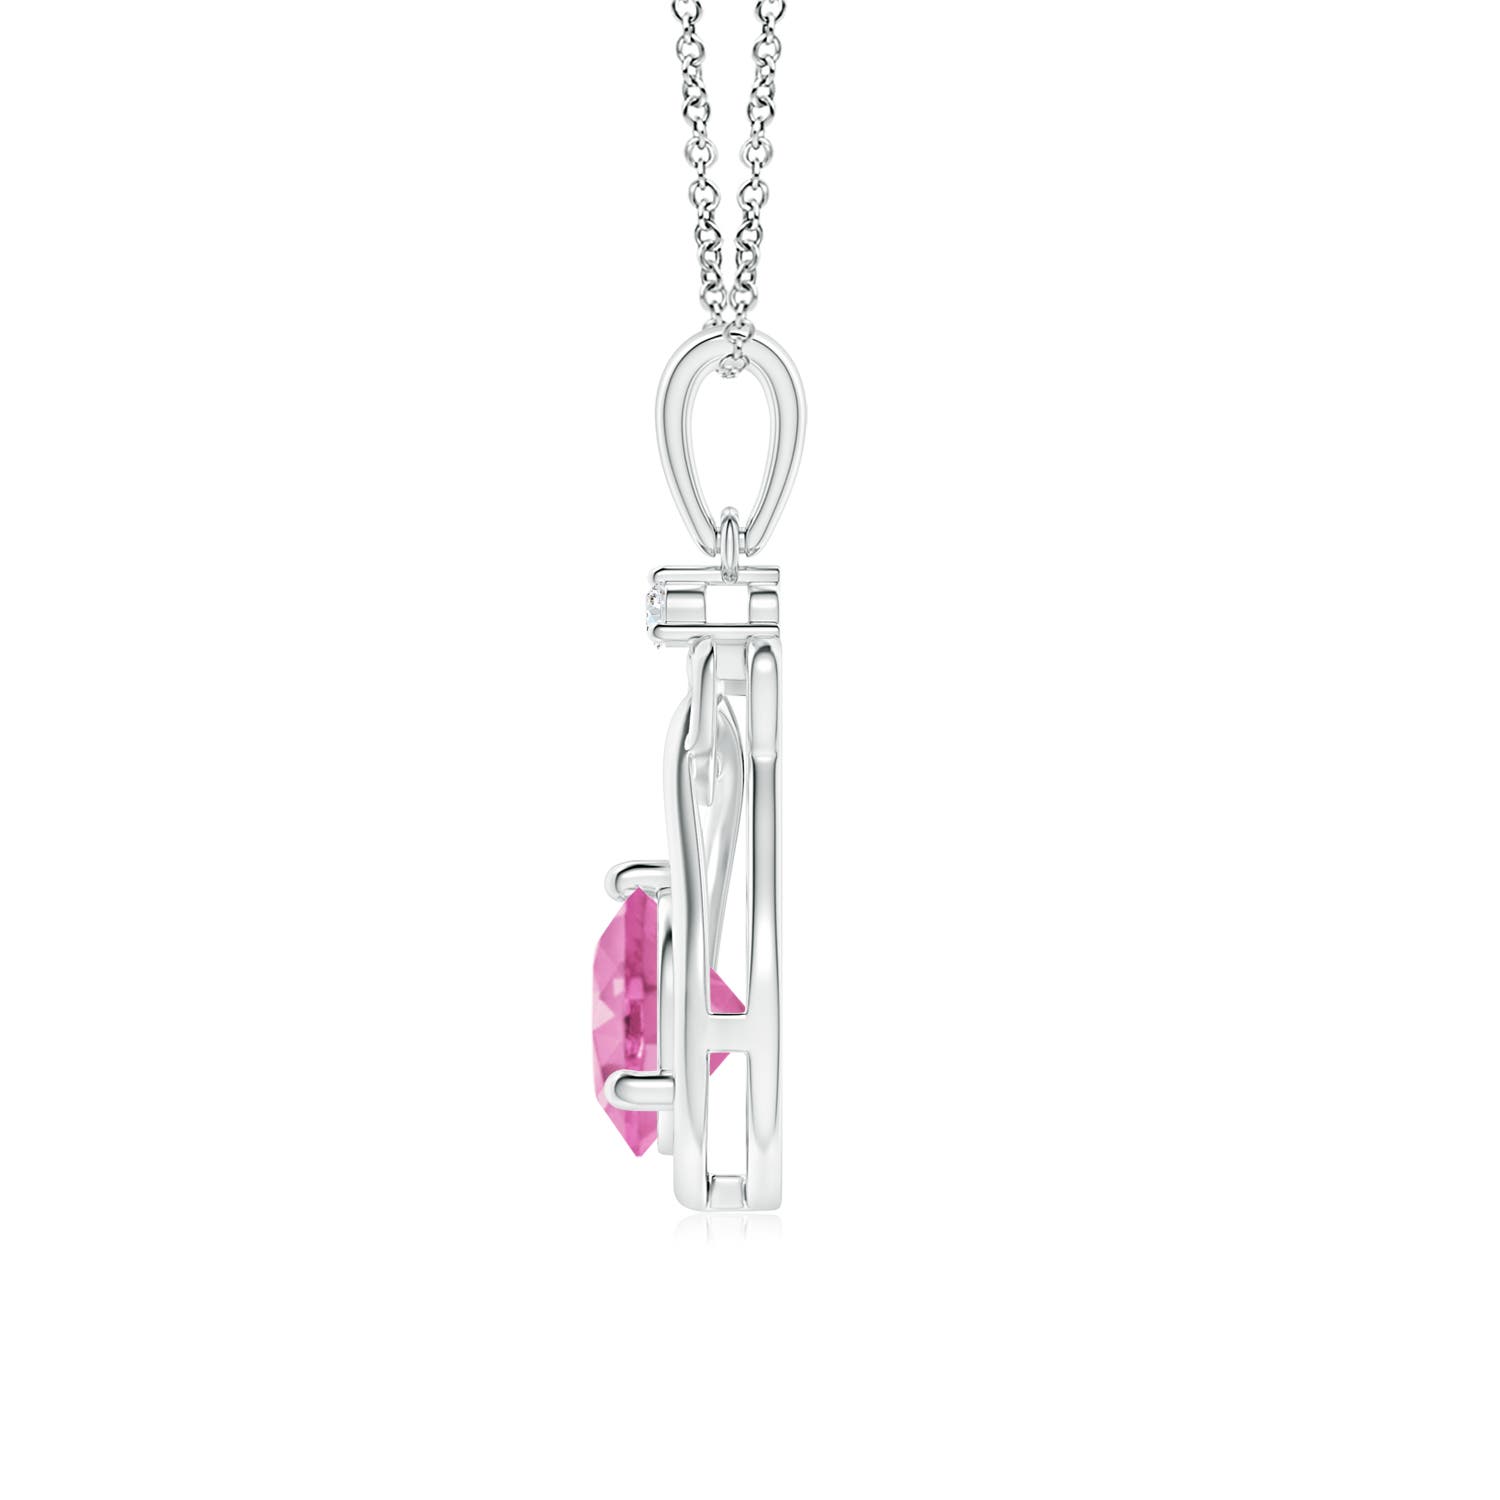 AA - Pink Sapphire / 1.01 CT / 14 KT White Gold